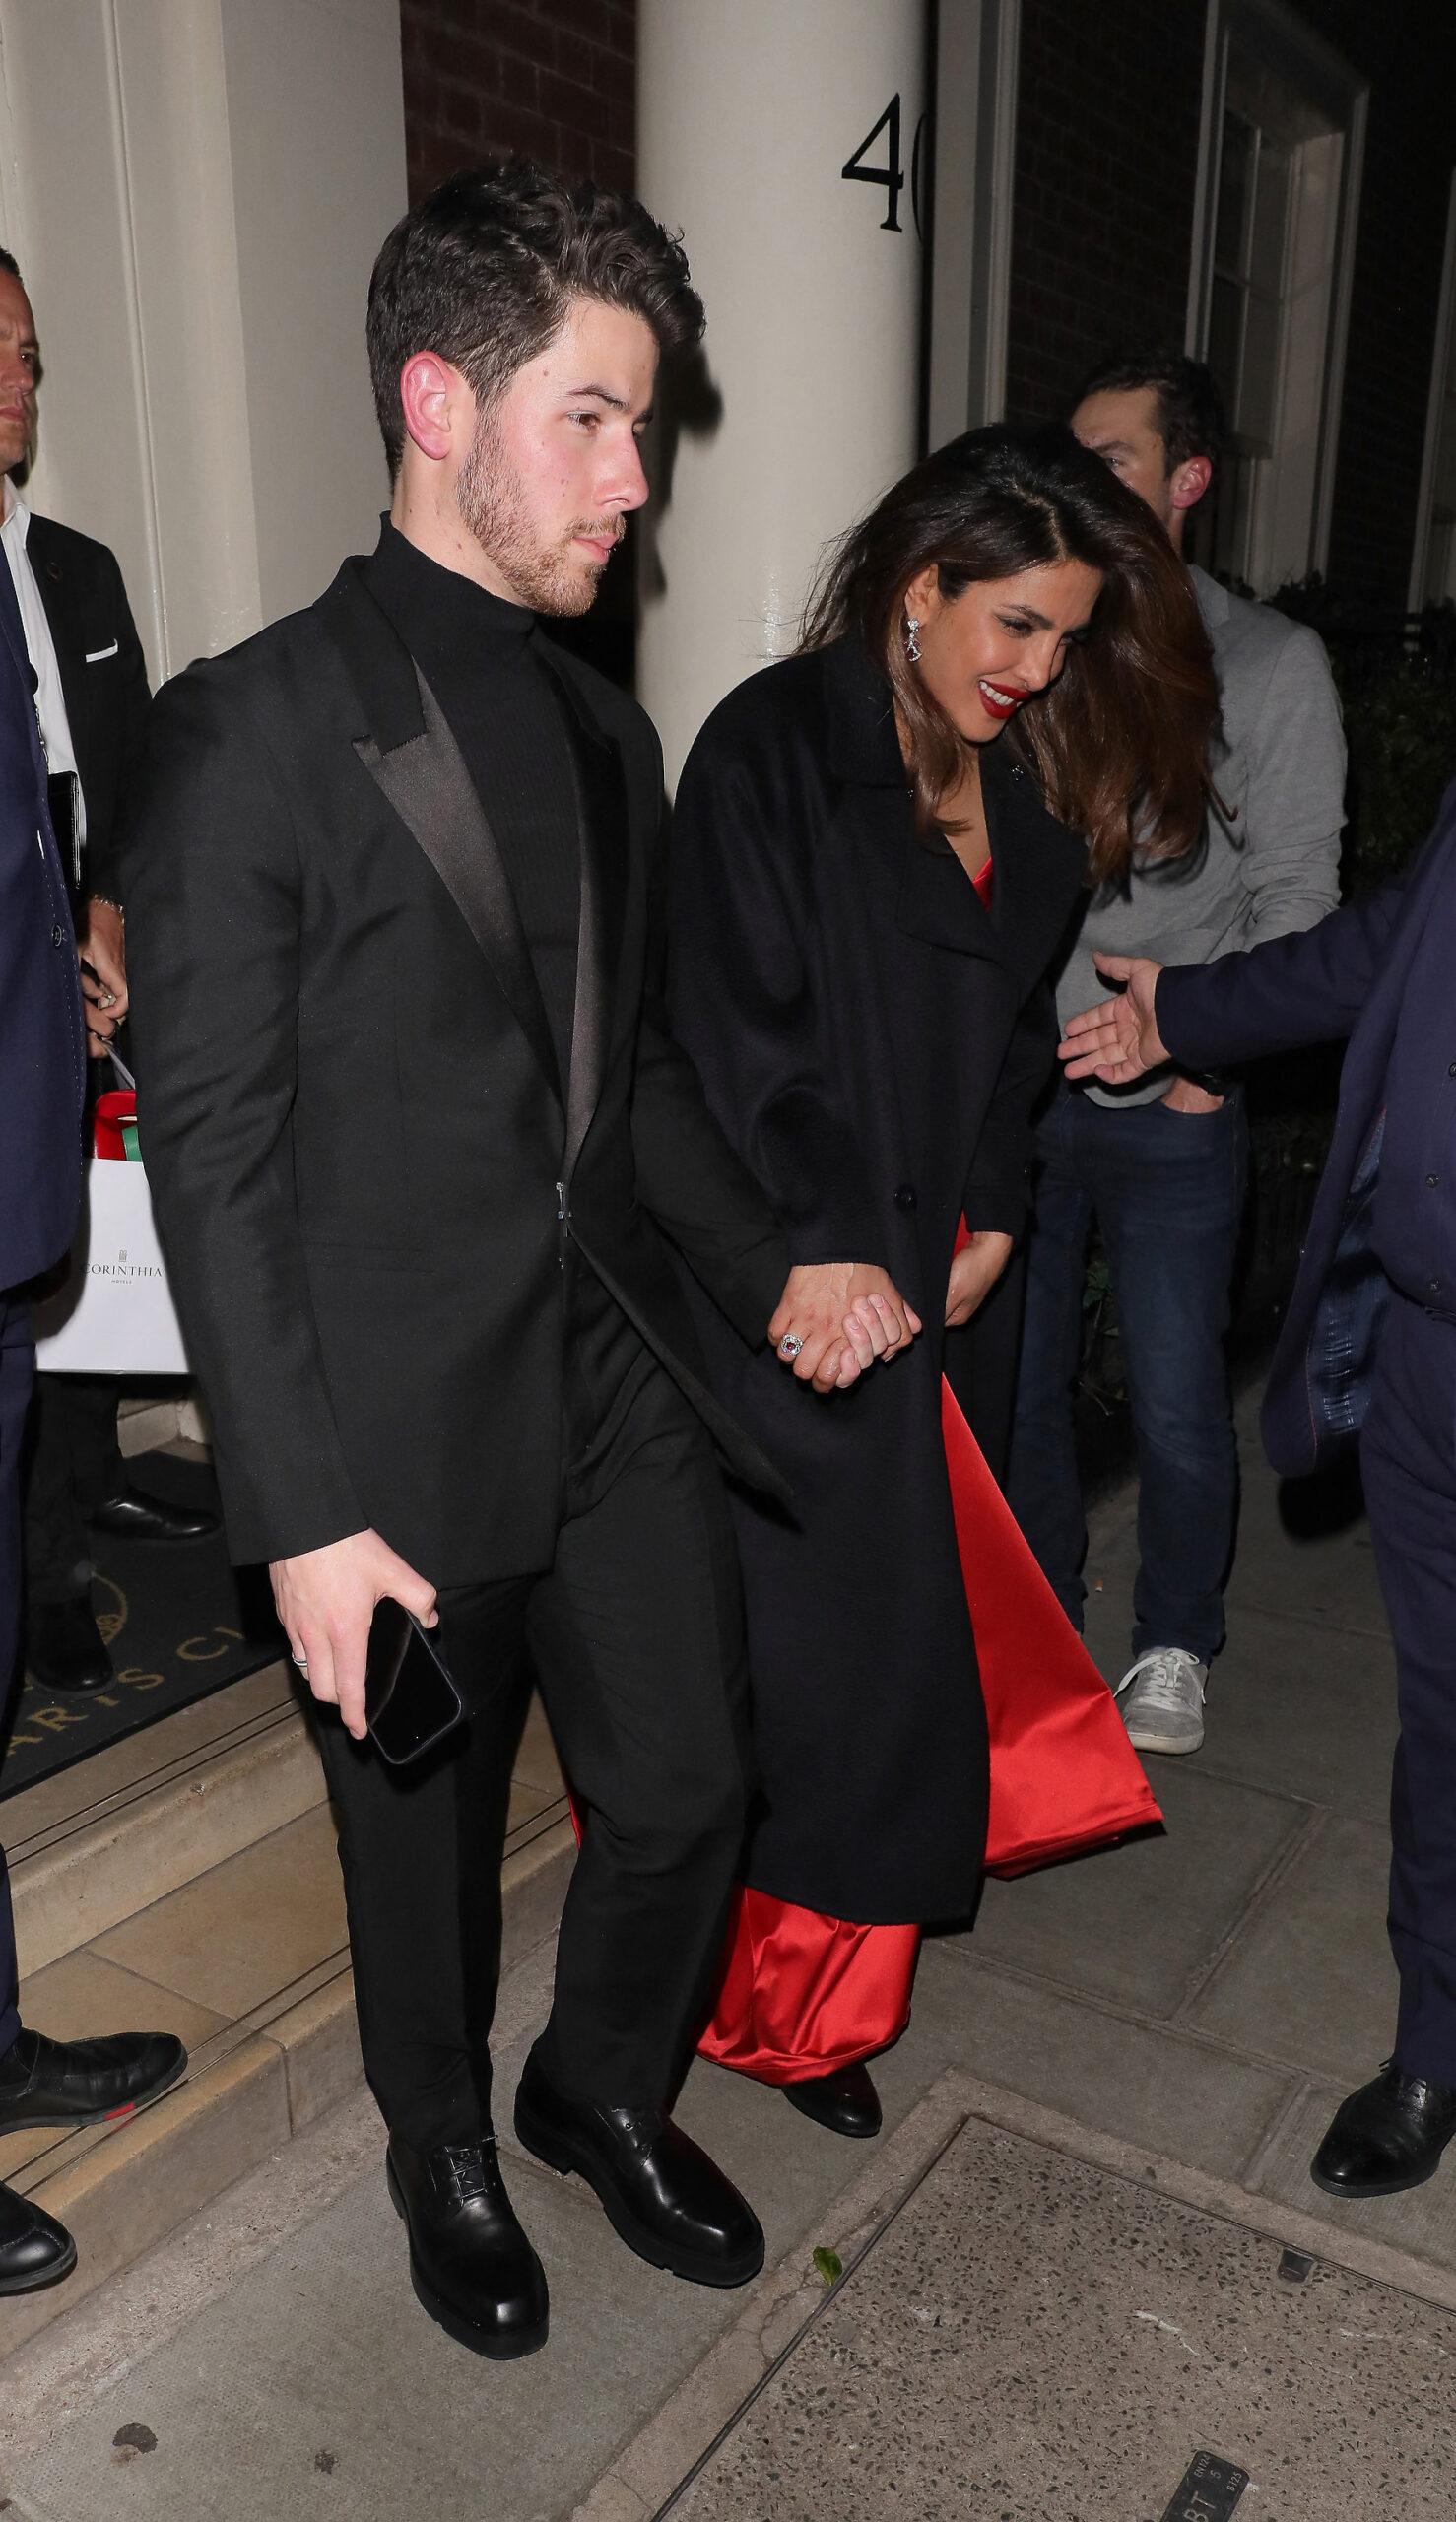 Nick Jonas and Priyanka Chopra leave the Mayfair Arts Club after the Citadel Premiere after party